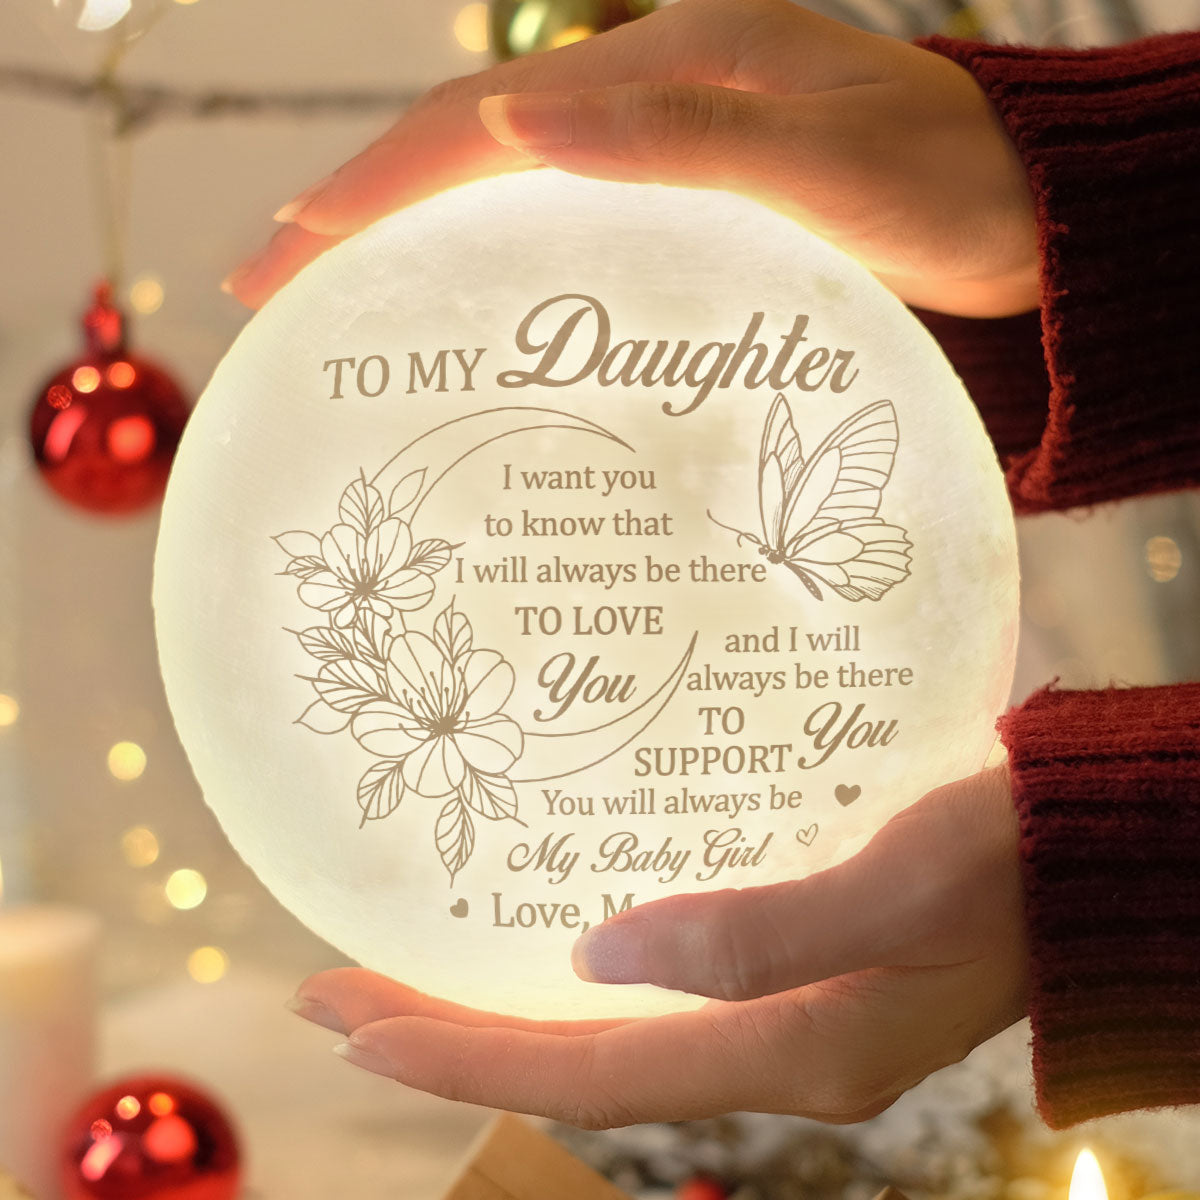 Mom Christmas Gift From Daughter, Gift for Mom From Daughter for